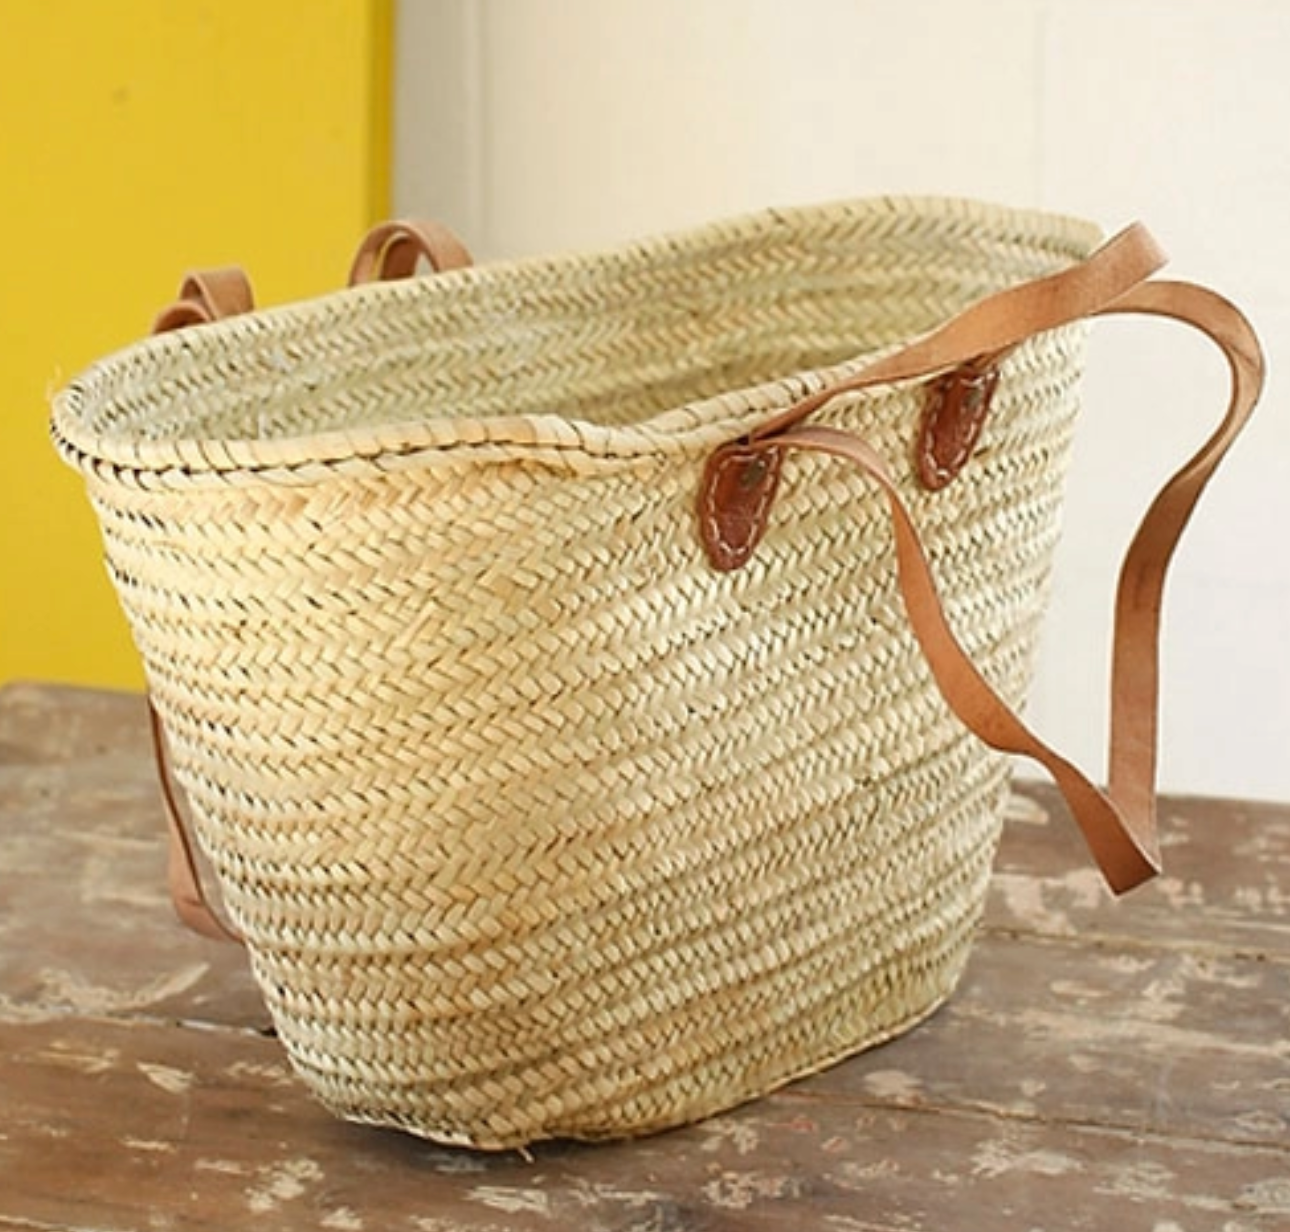 This is a Double Handled French Market Basket by Medina Mercantile and sold at The Hare & The Hart. The basket is in the shape of a tote bag and is light in color. There are four handles on the basket in total- two on each side. There is one small handle and one long handle on each side of the basket.